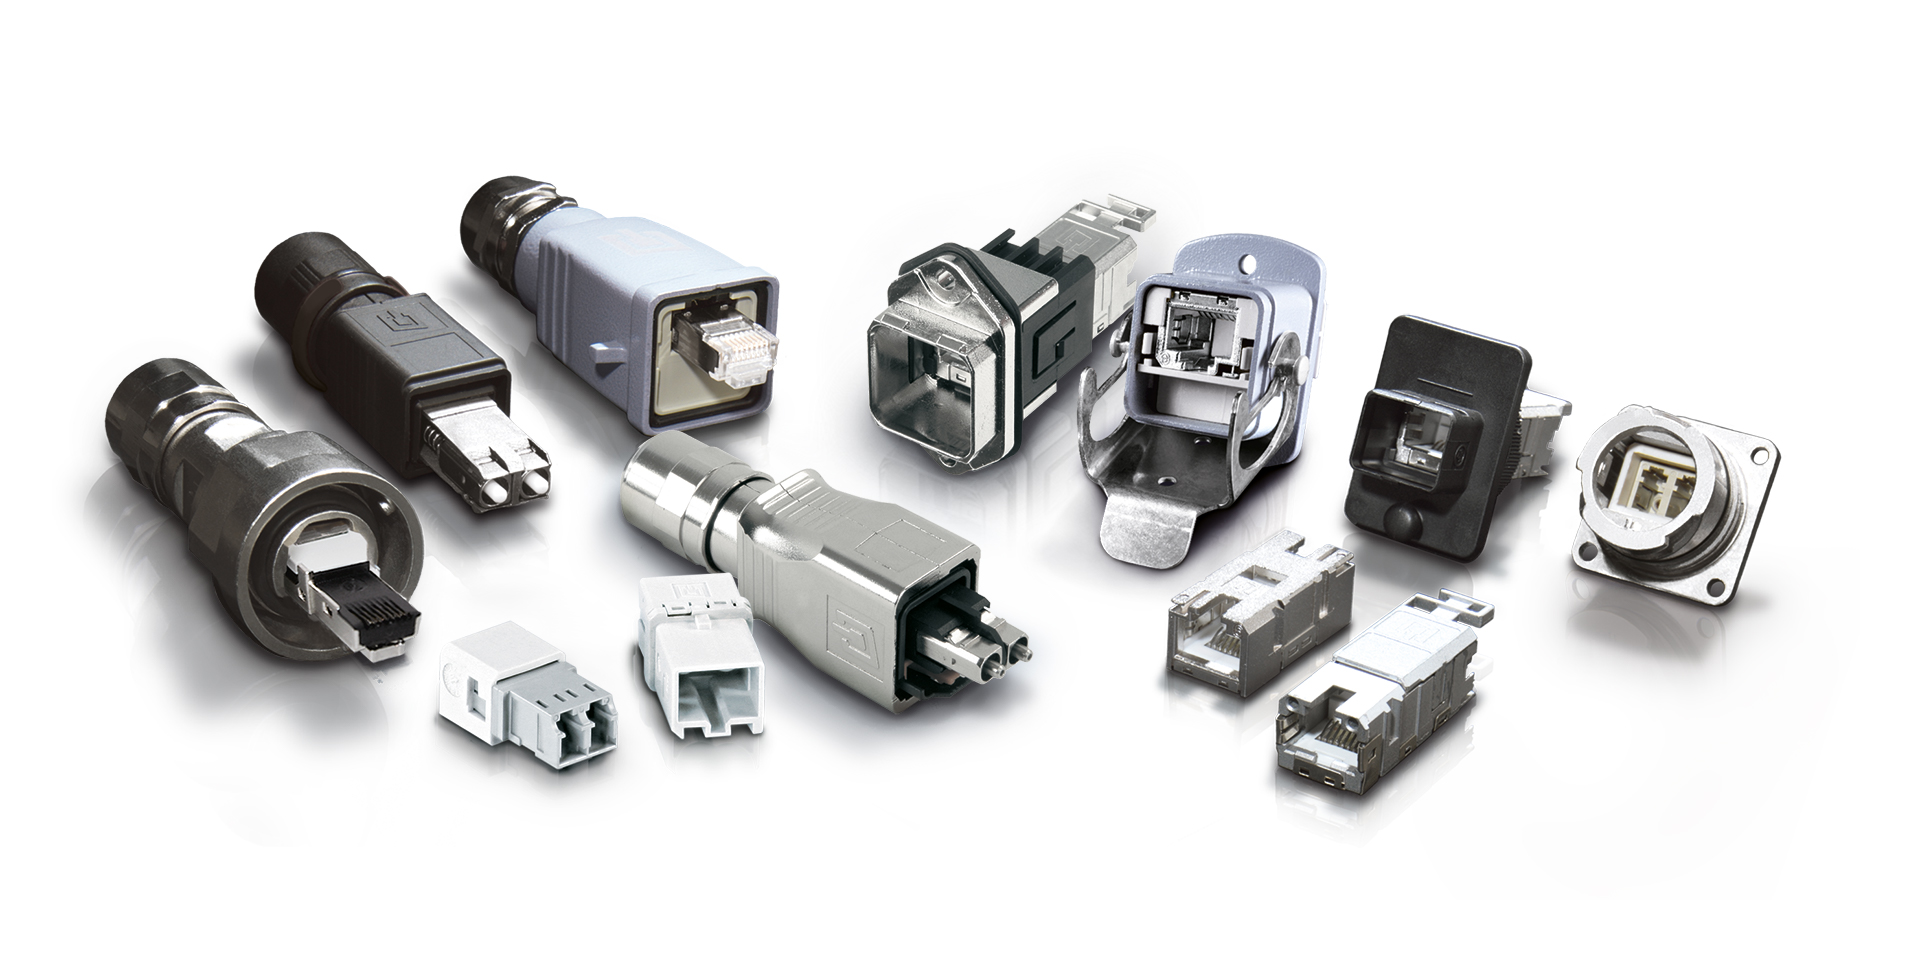 STX connector product family